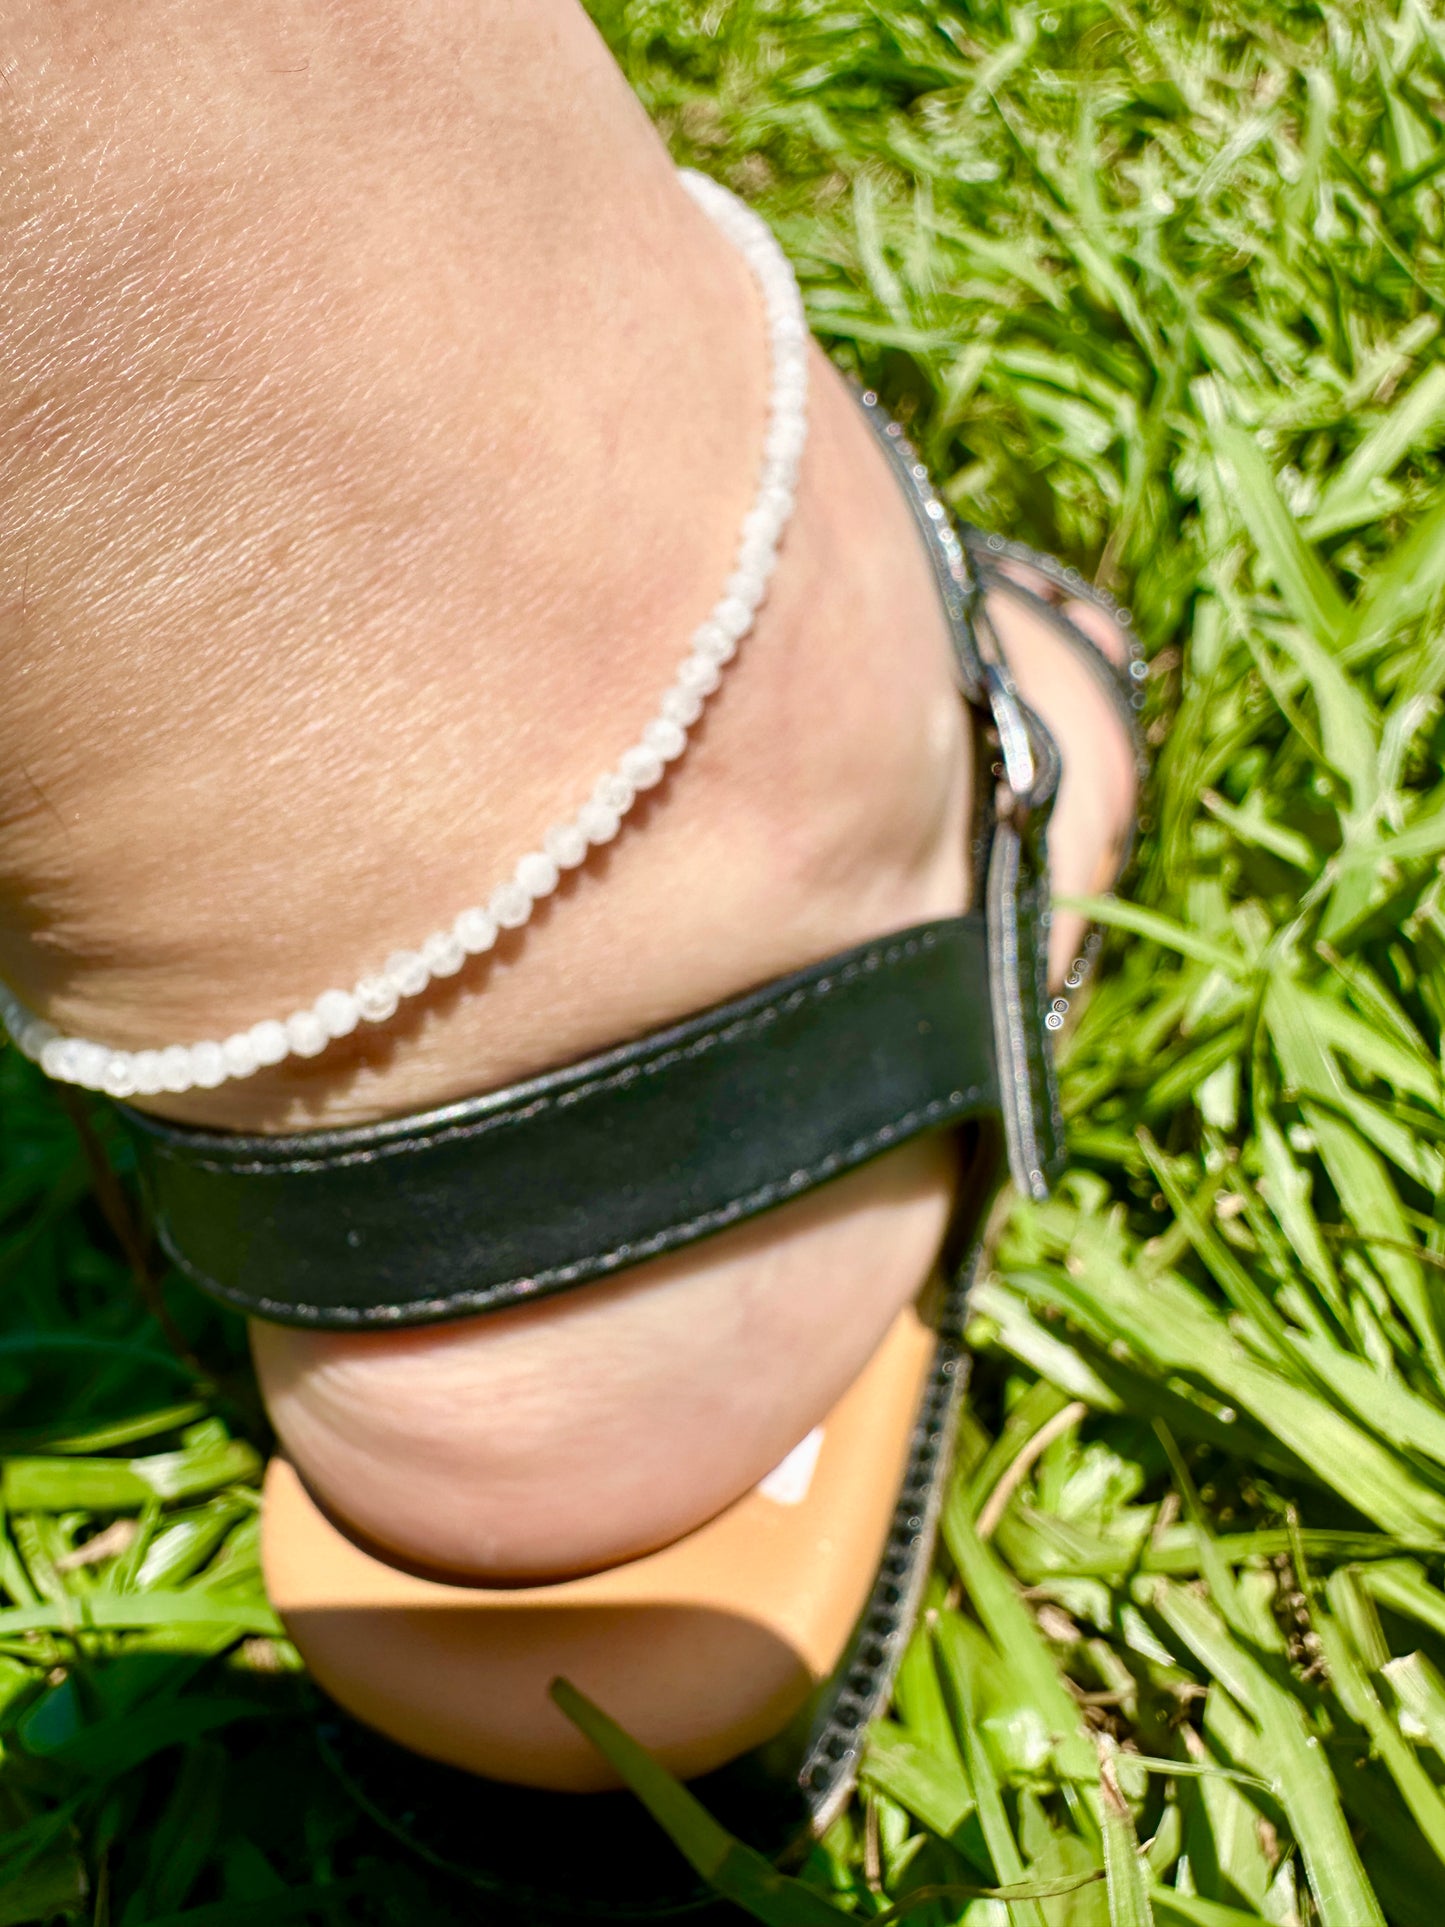 White Quartz Faceted Ankle Bracelet - Adjustable Elegant Anklet, Silver Chain, Perfect Summer Accessory, Chic and Sparkling Jewelry